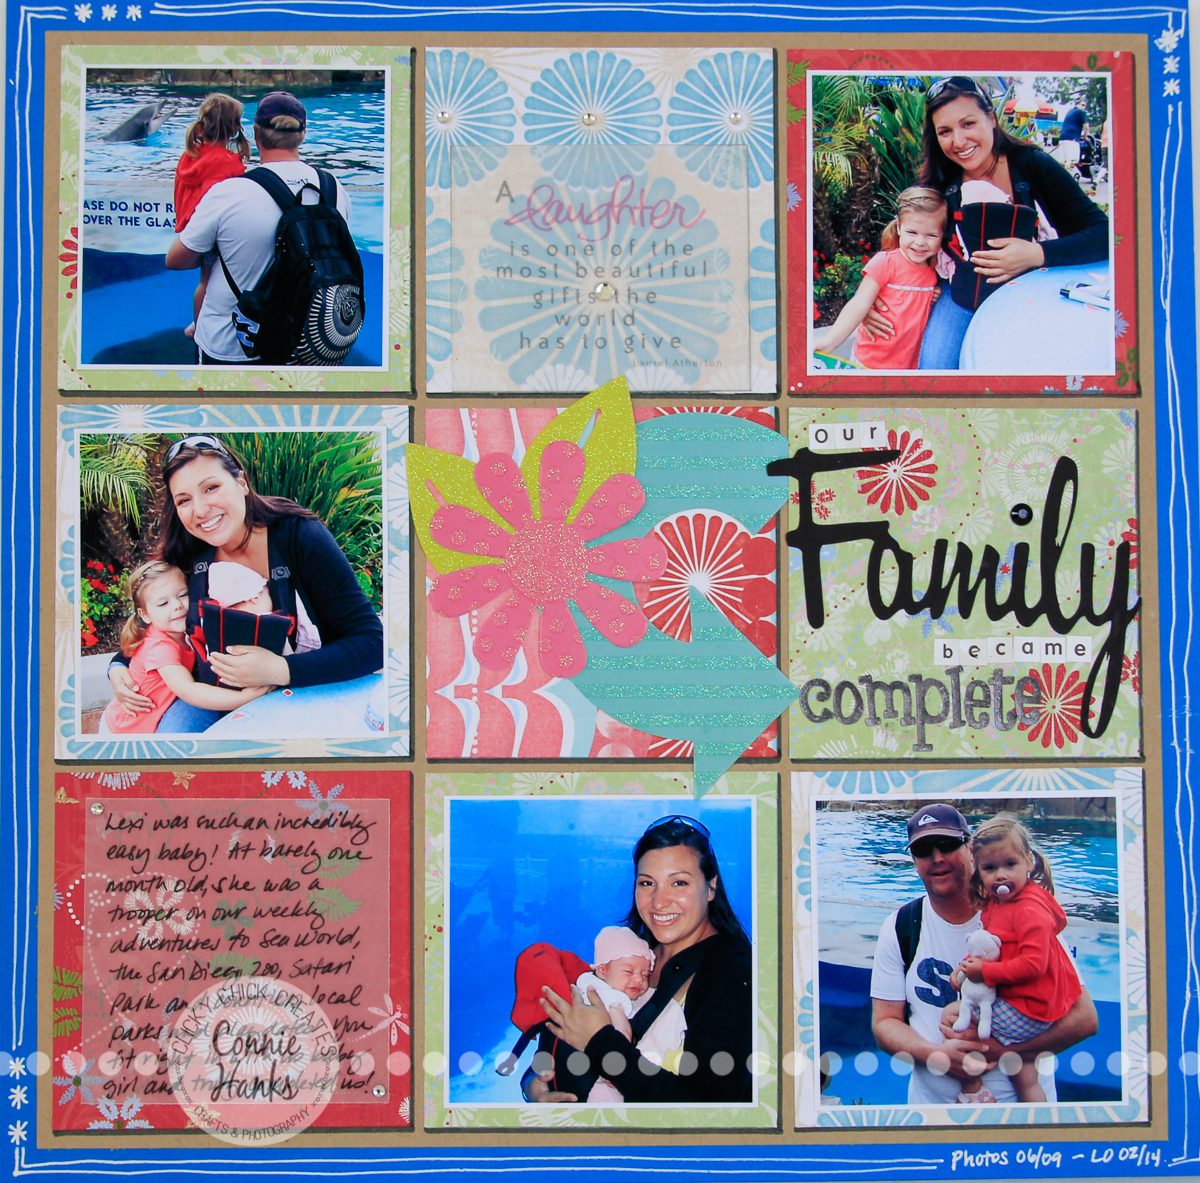 Connie Hanks Photography // ClickyChickCreates.com // Our Family Became Complete - scrapbook page in grid format using old product - looks fresh